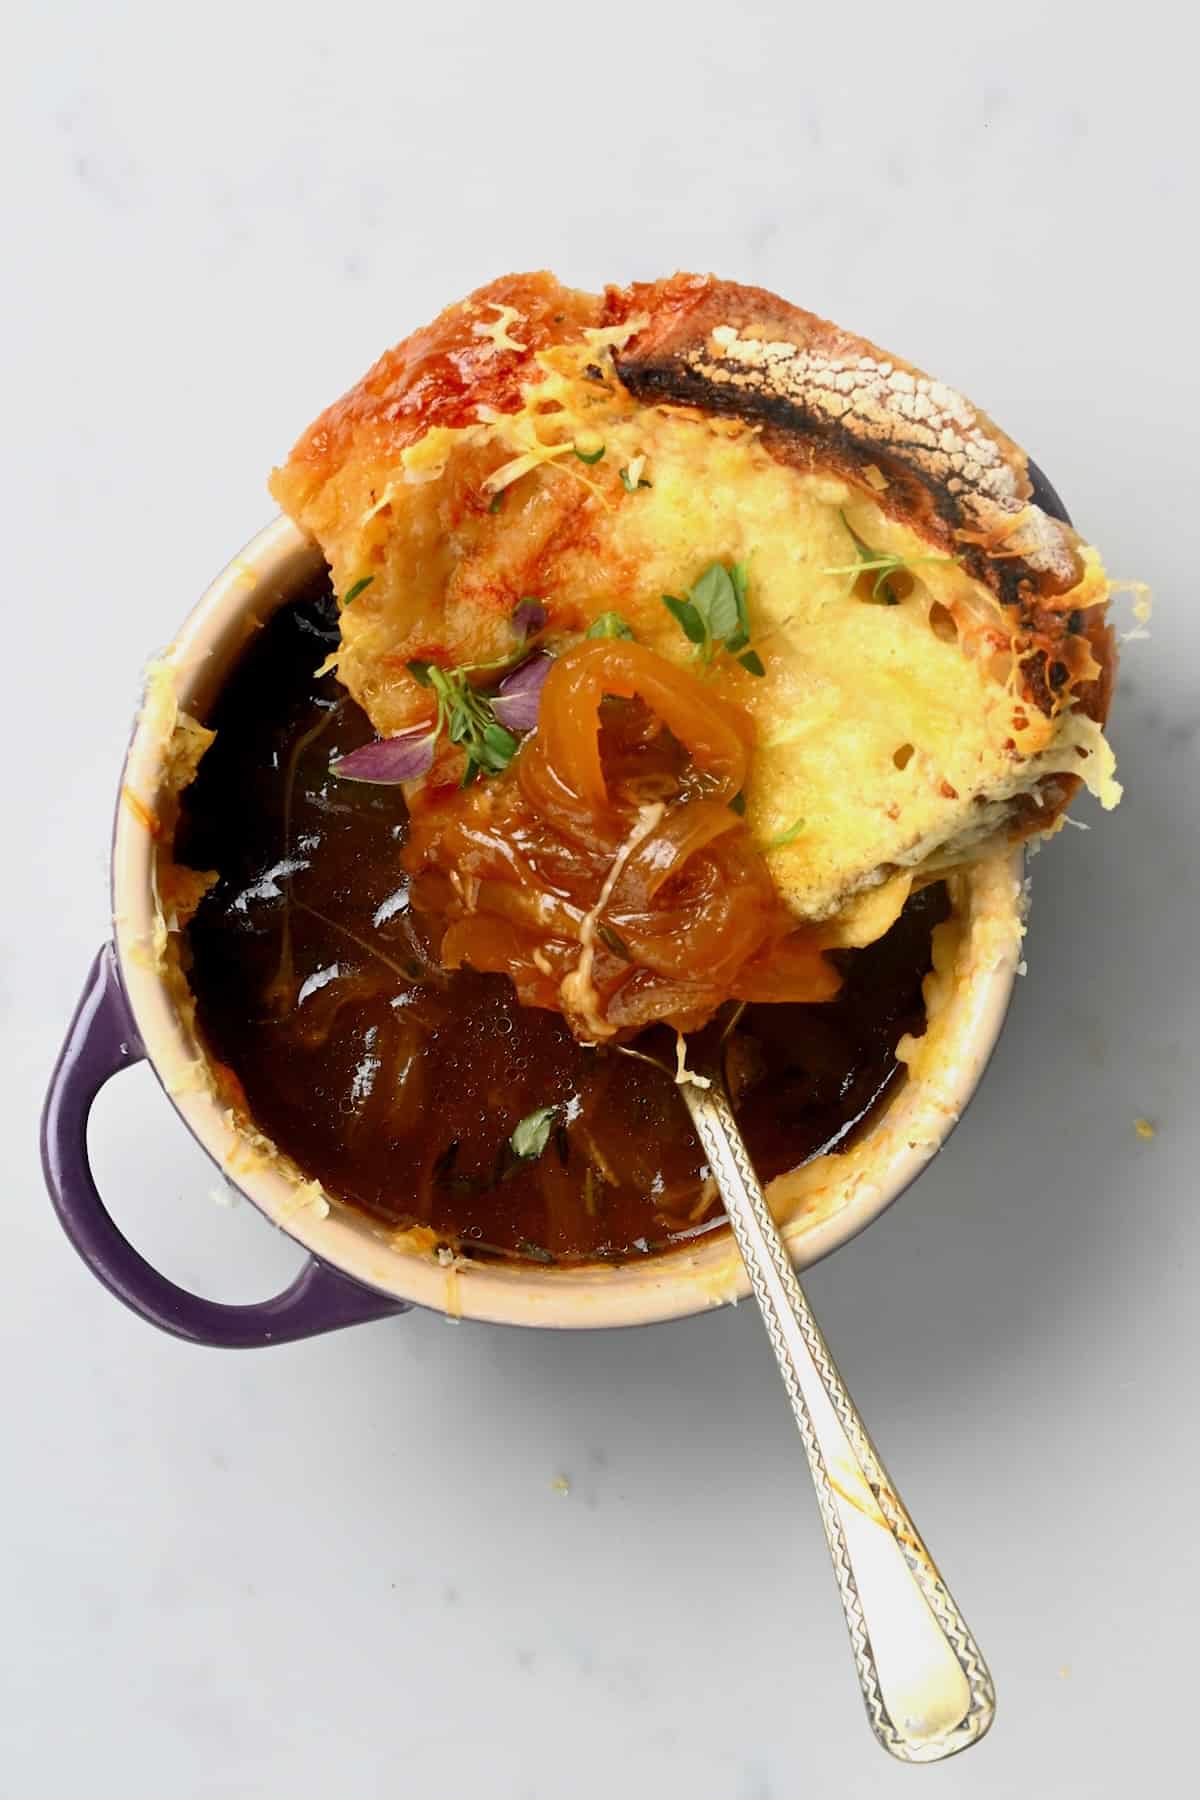 A spoon dipped in a bowl with onion soup